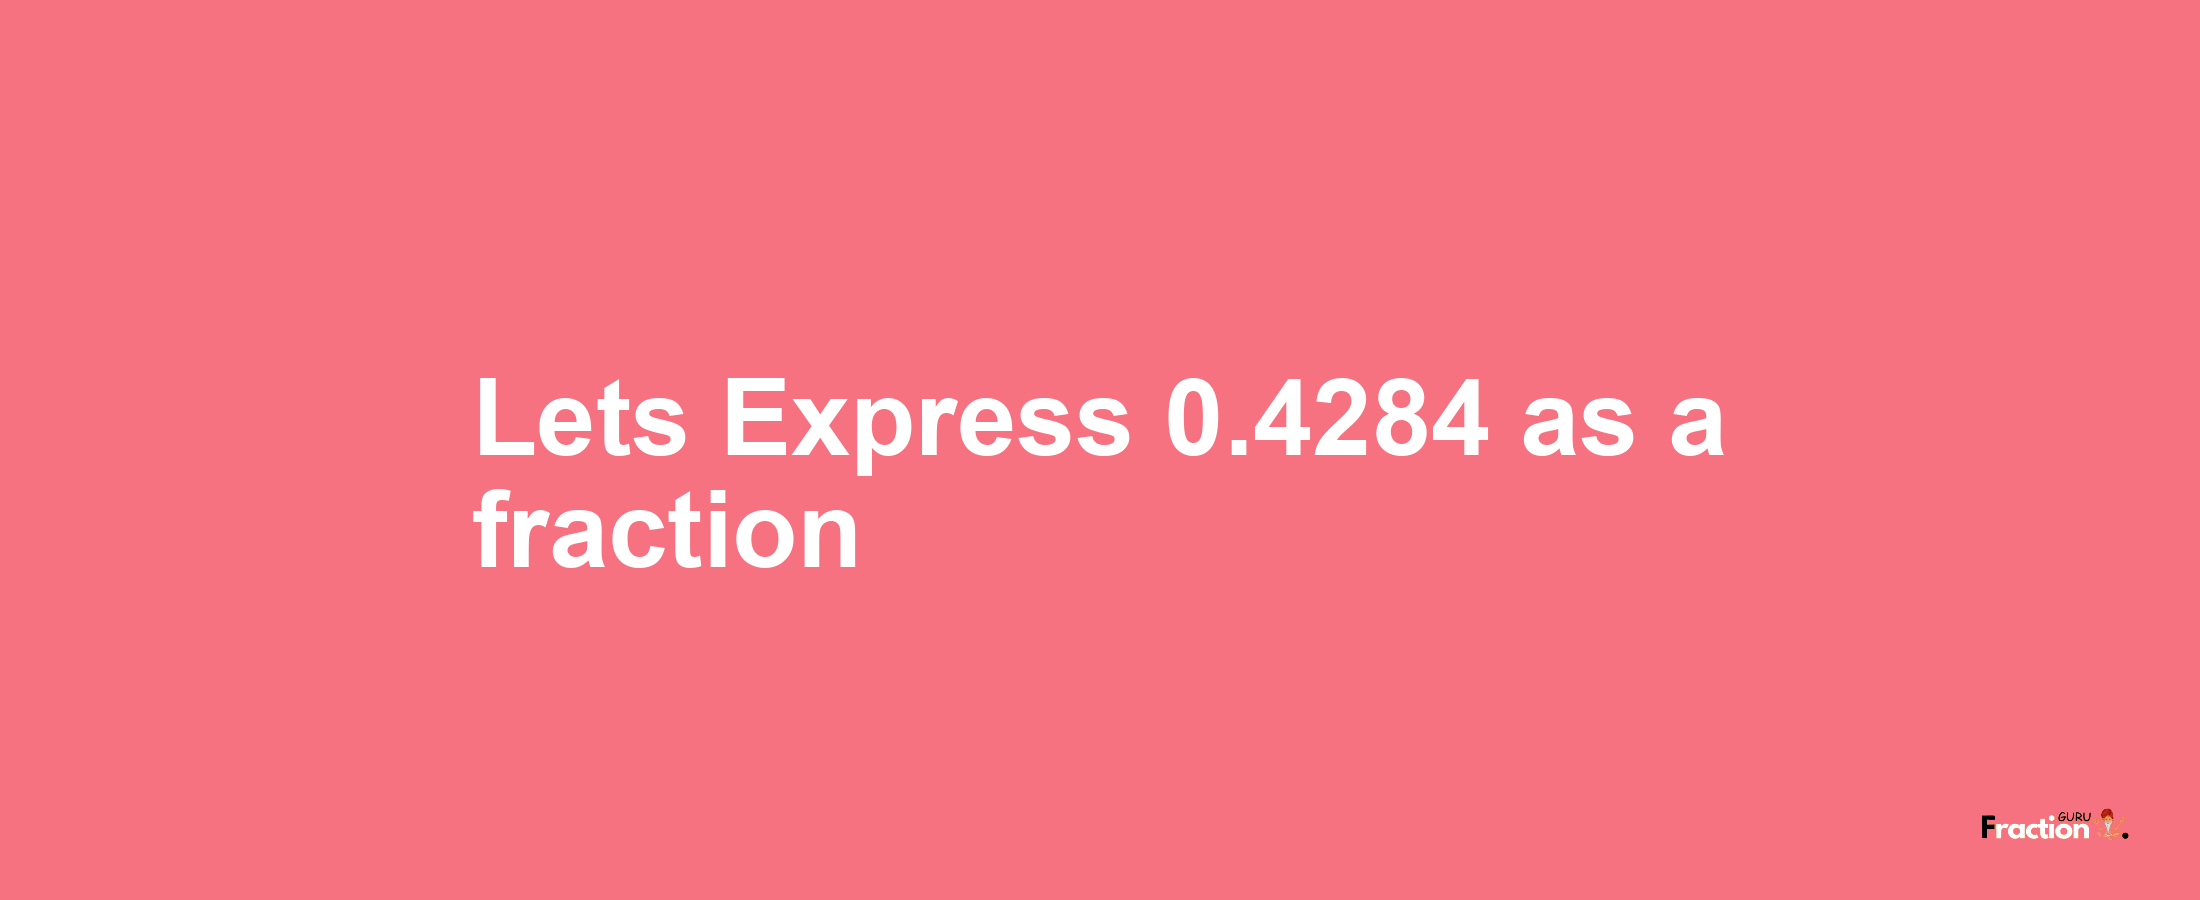 Lets Express 0.4284 as afraction